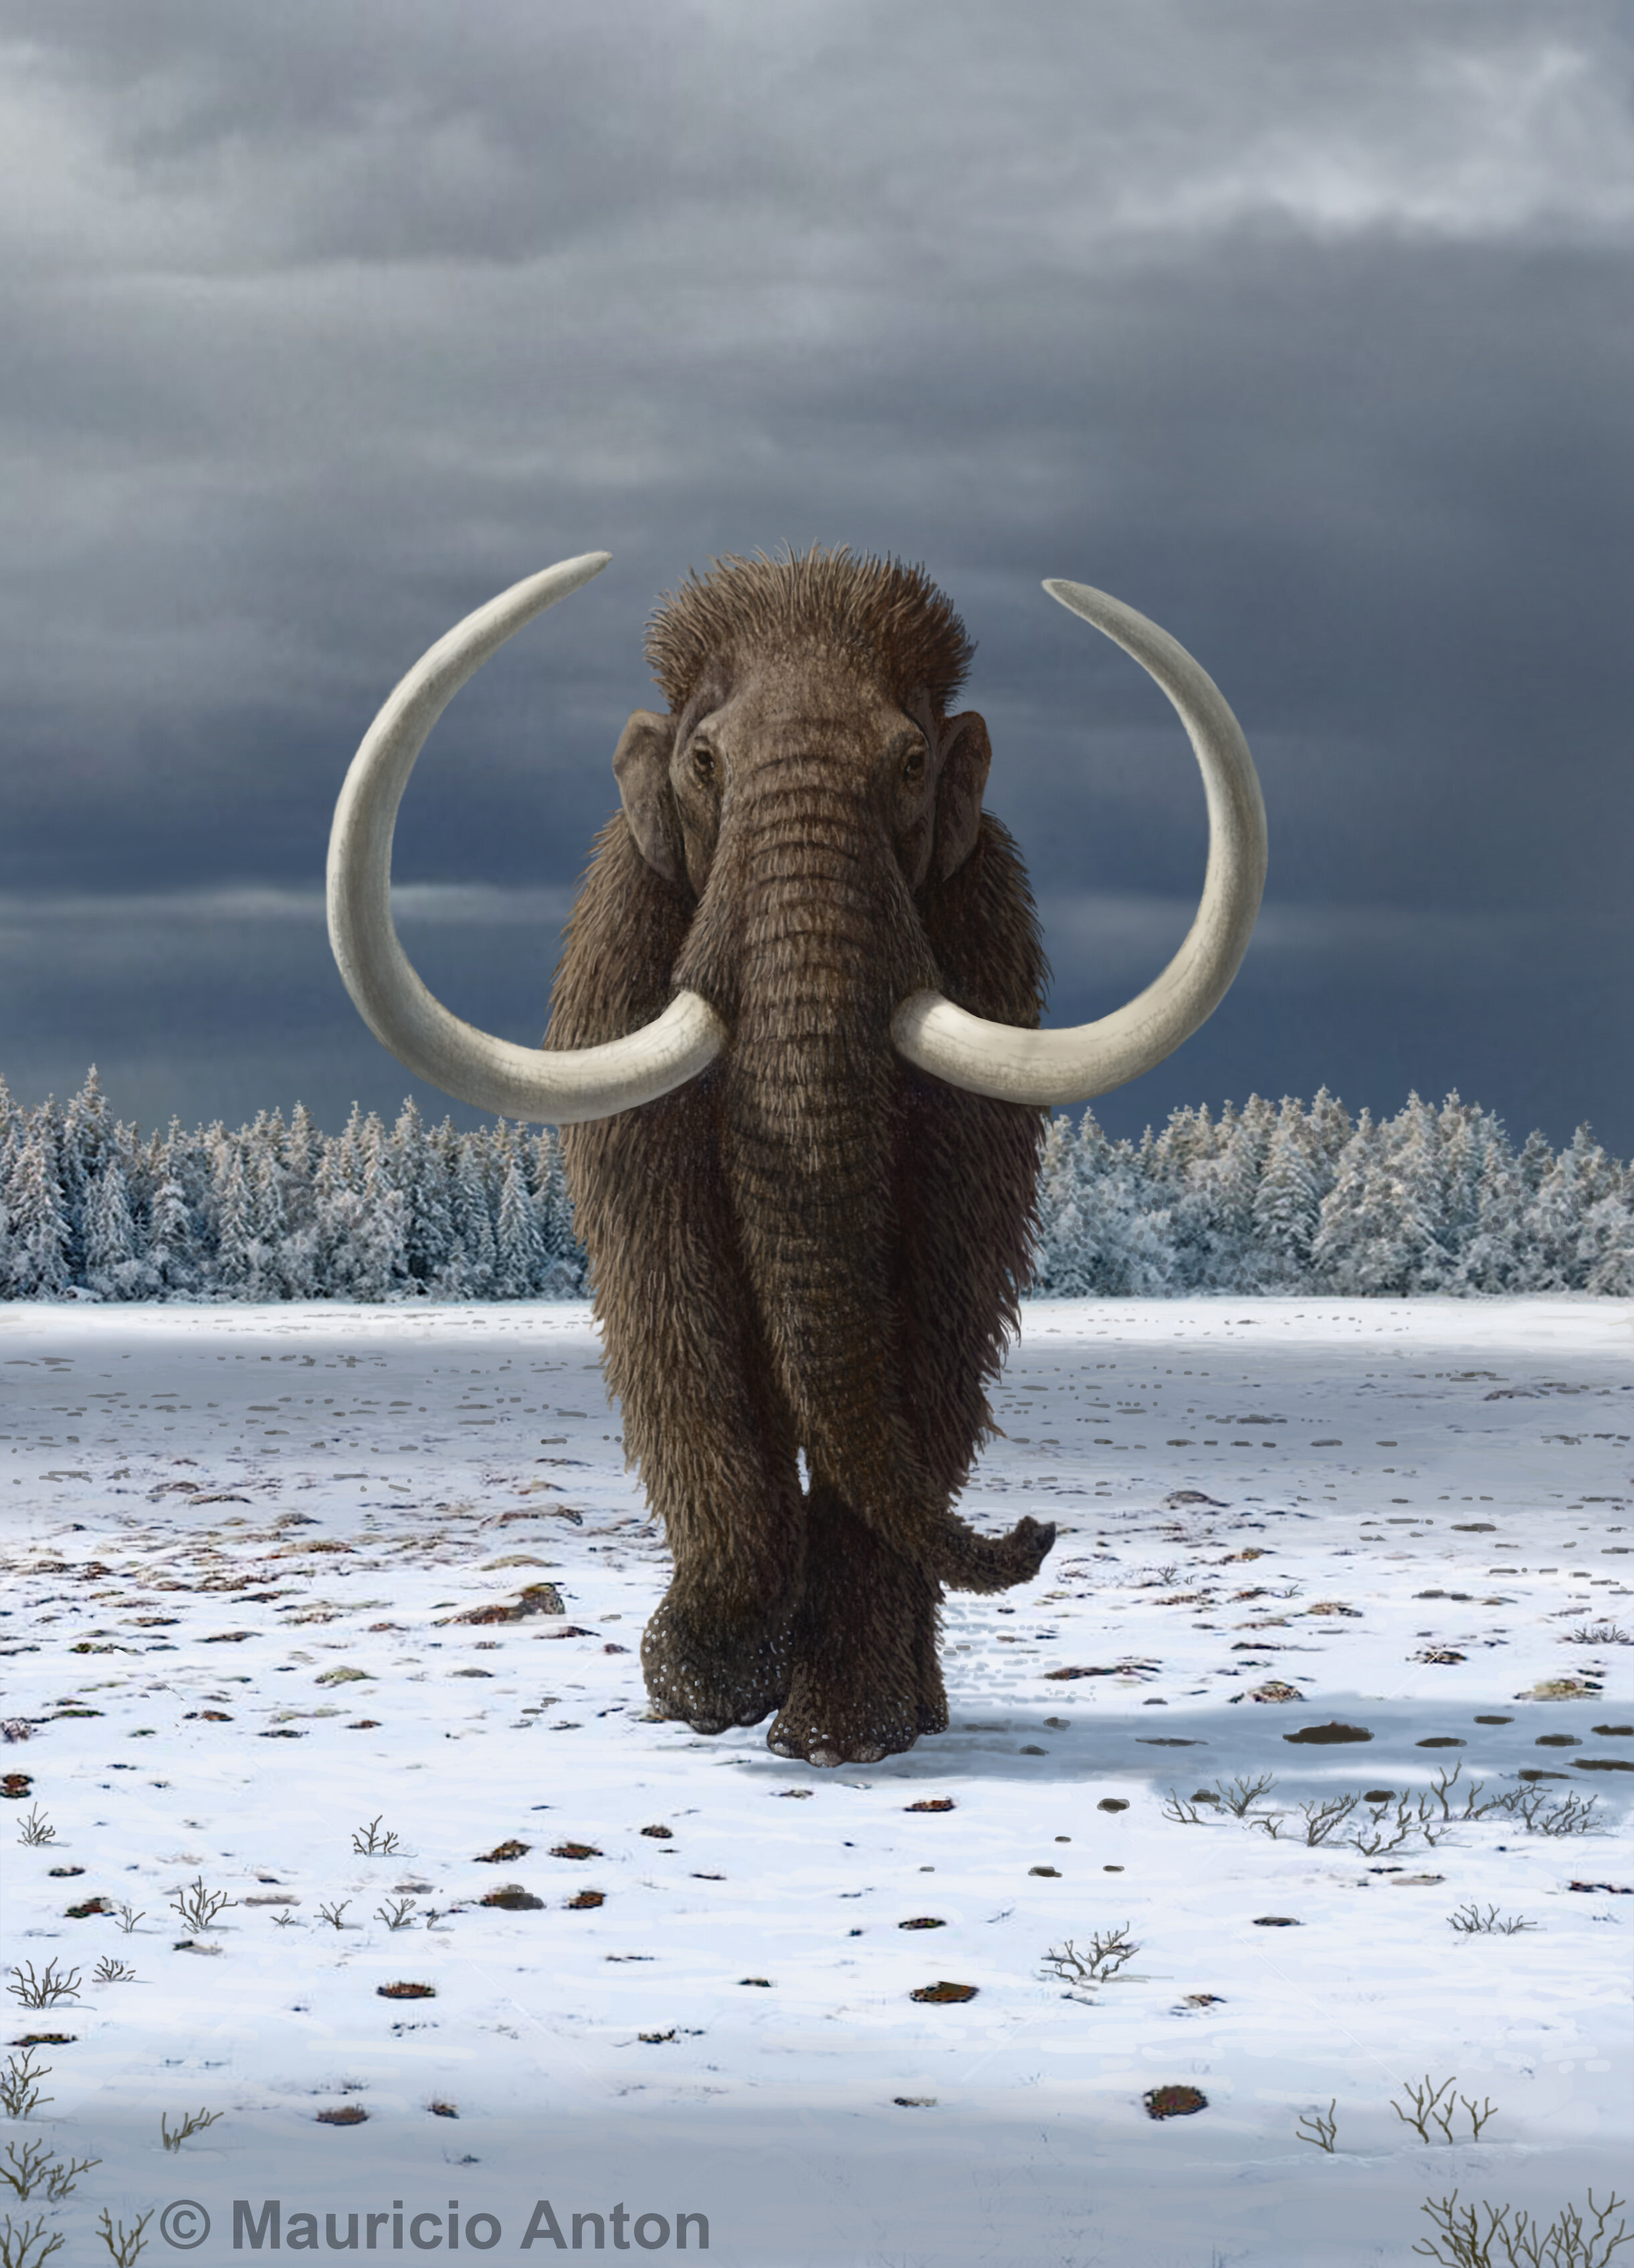 Humans hastened the extinction of the wooly mammoth